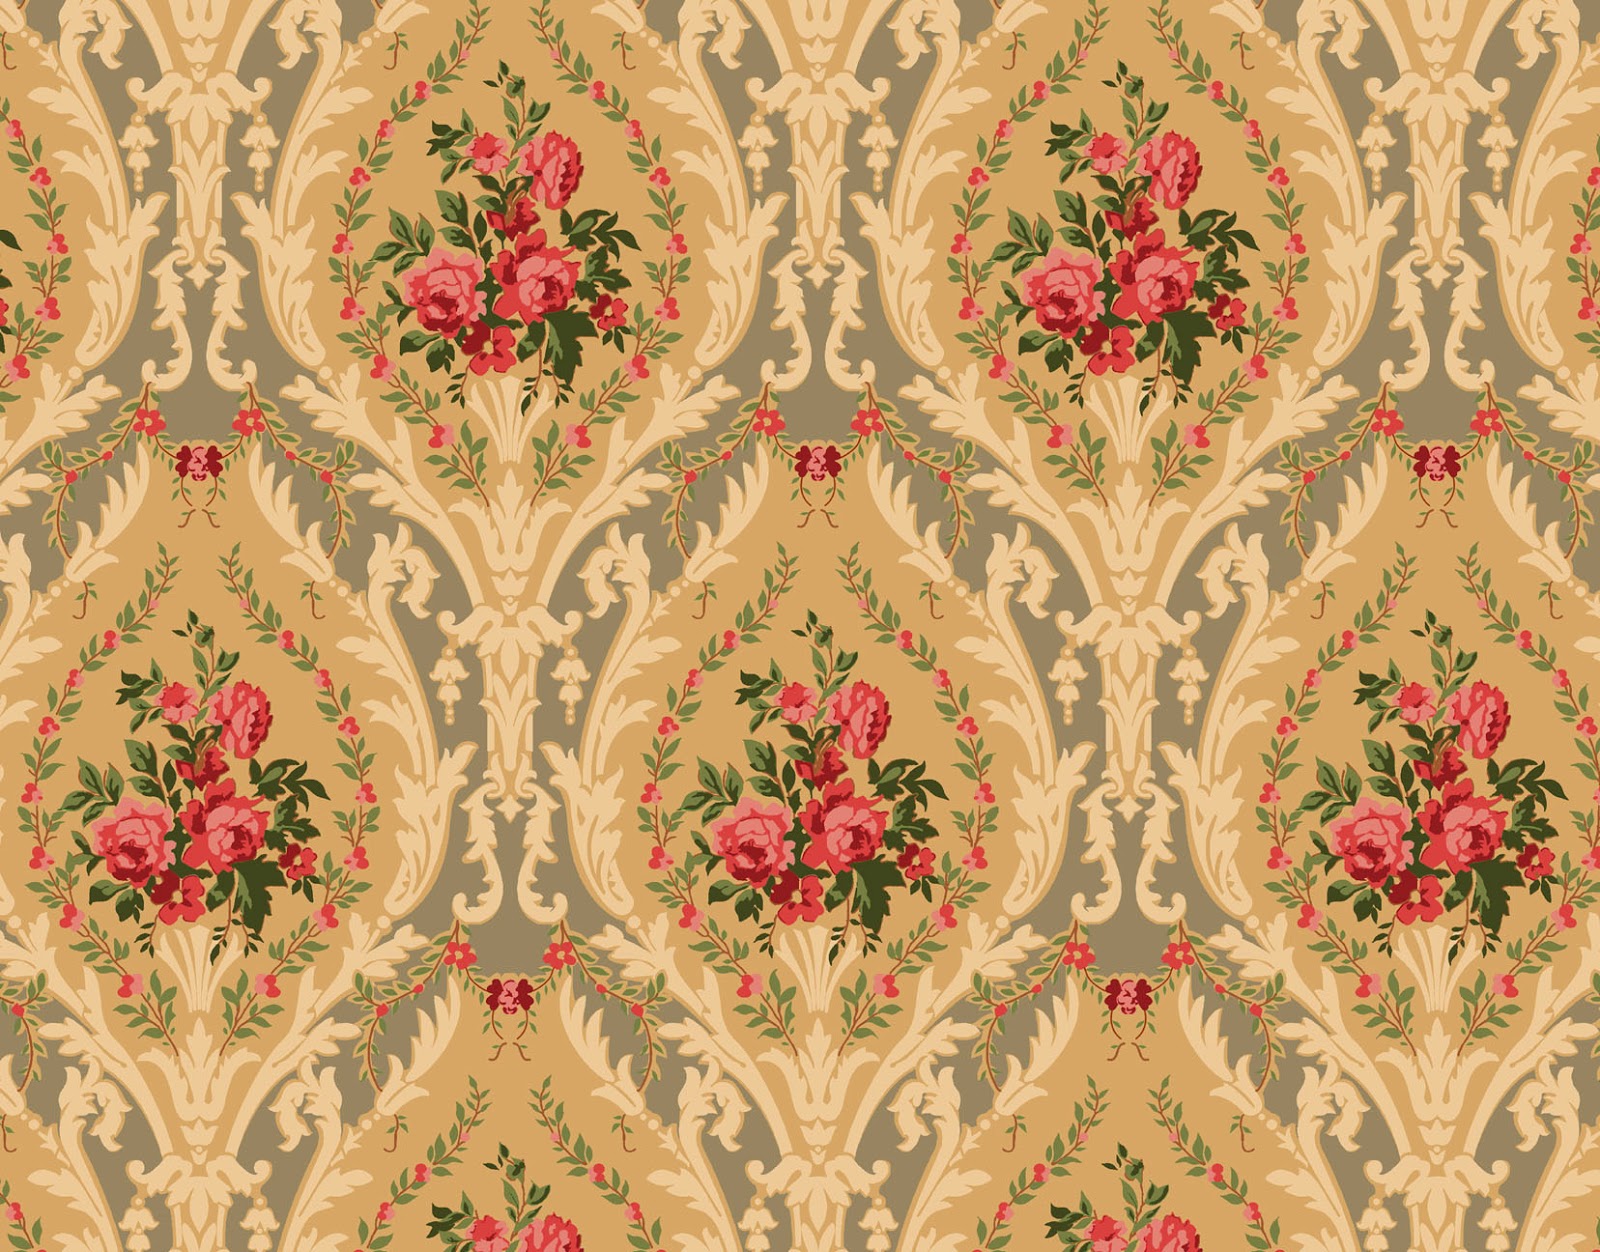 Free Victorian Texture Or Background Victorian Style Afalchi Free images wallpape [afalchi.blogspot.com]